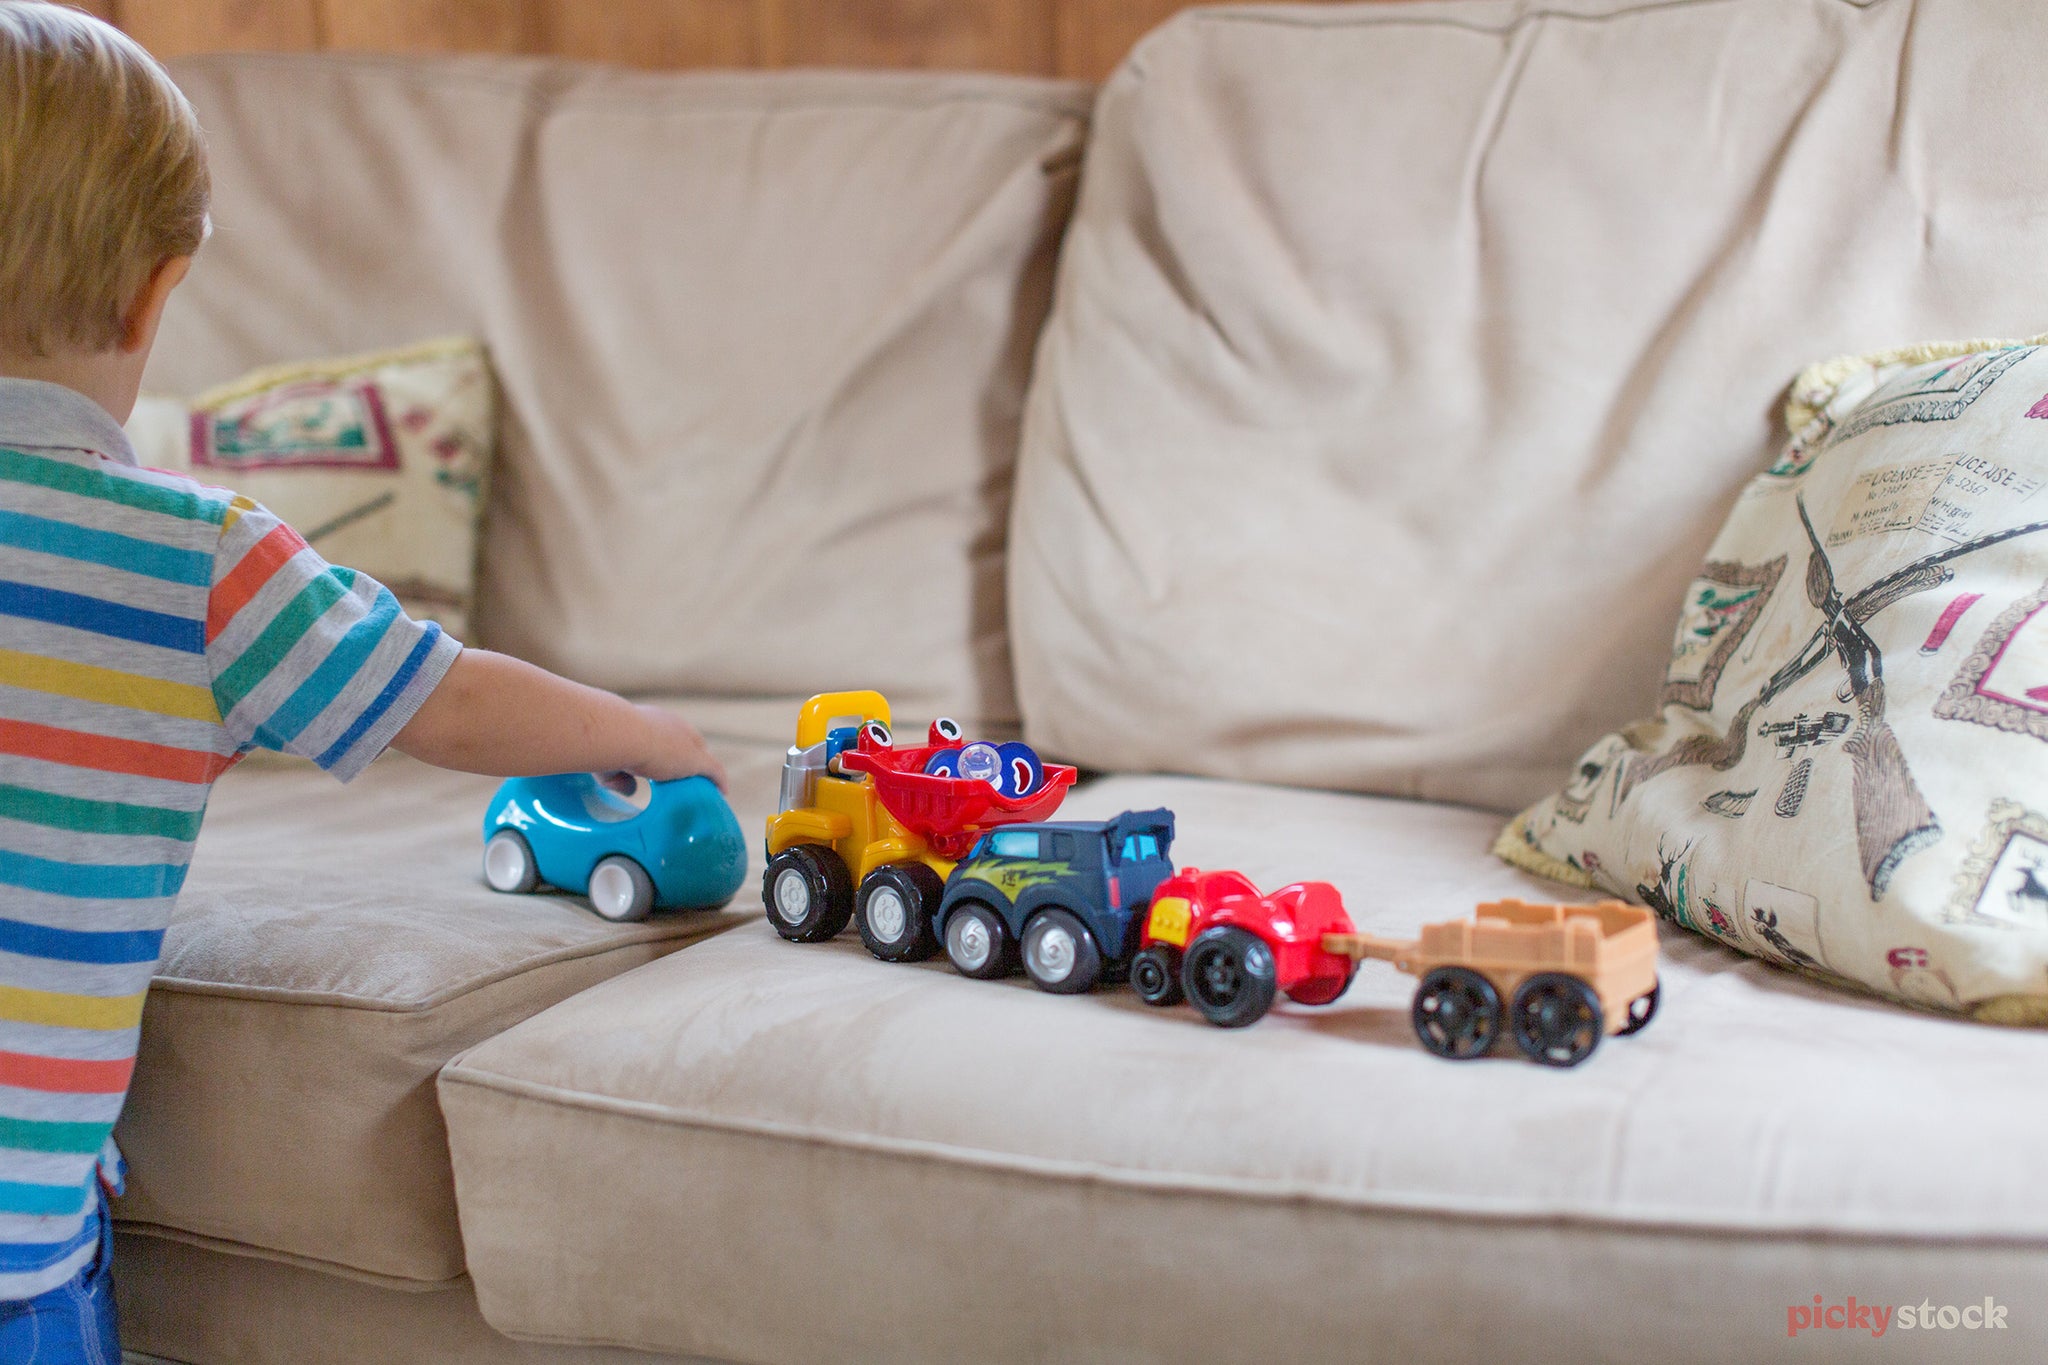 Over the shoulder shot of a child playing with toys, train and truck set along a white couch. 
